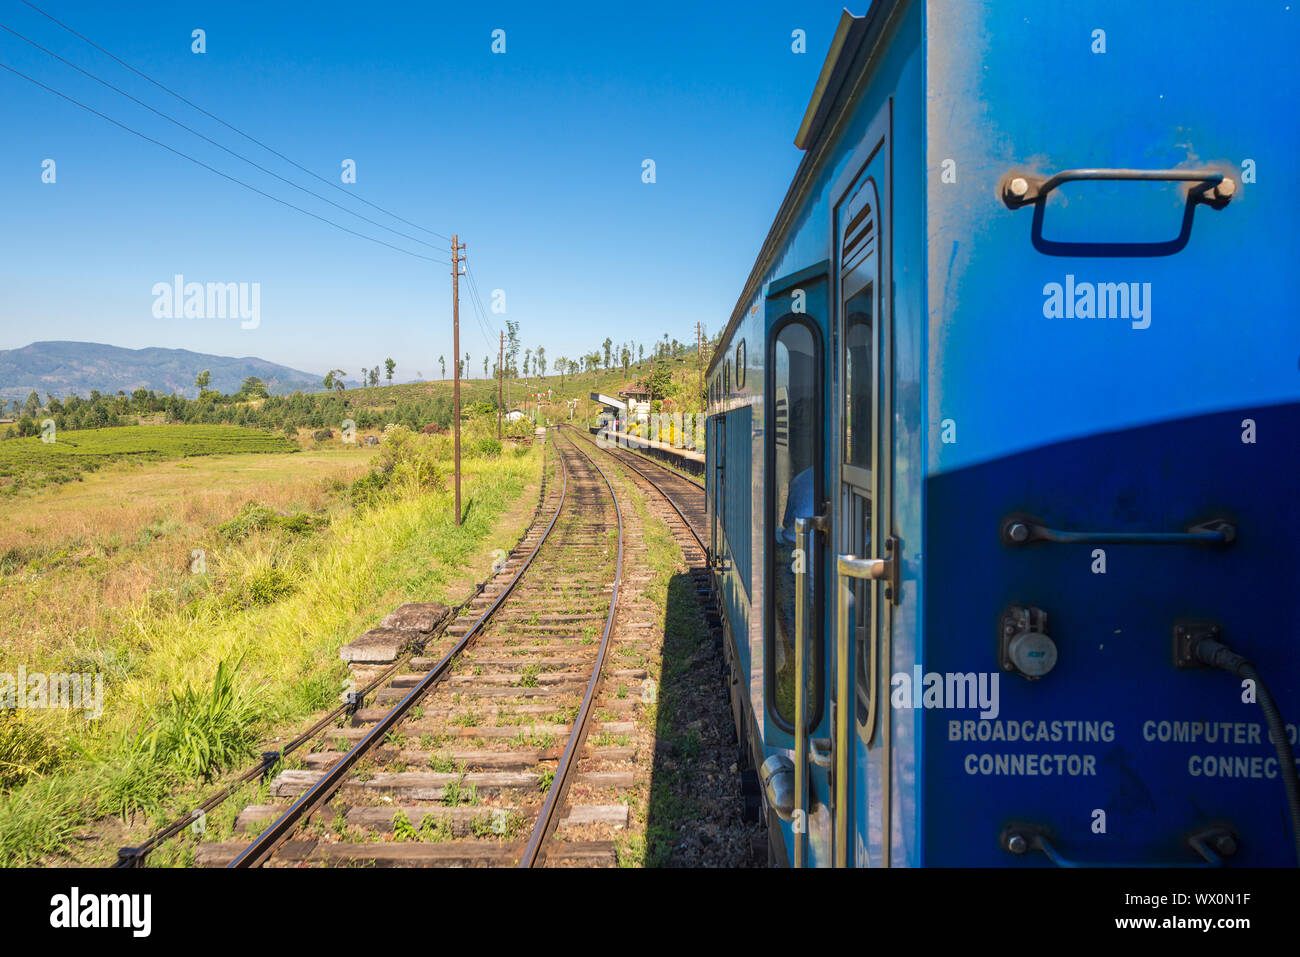 The famous Sri Lankan railway is going through the highlands and mountains Stock Photo